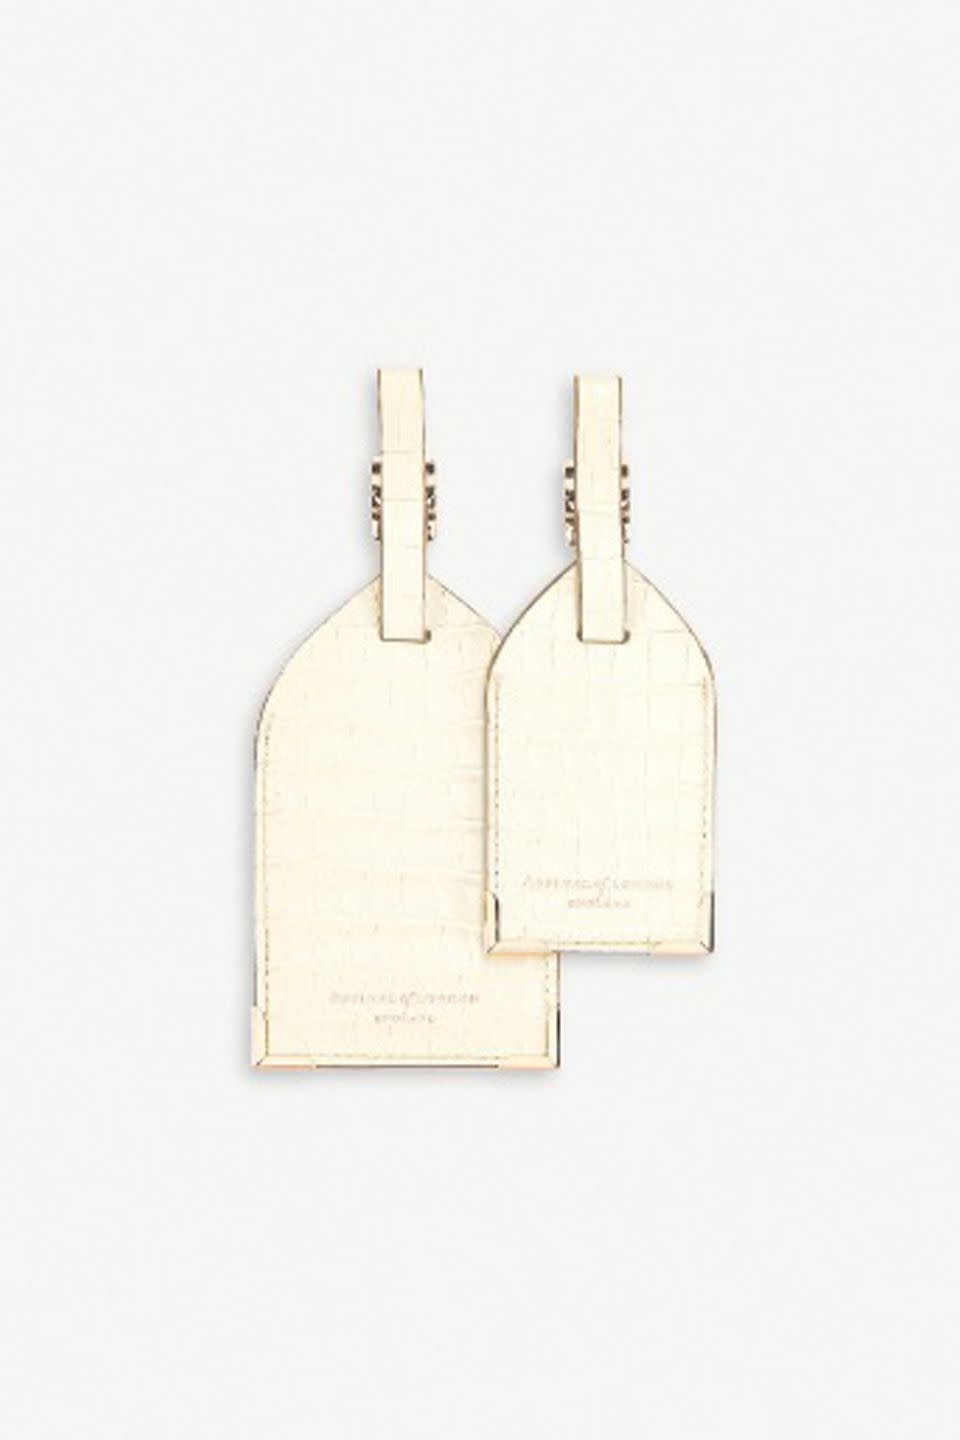 Travel gifts - Aspinal Leather Luggage Tags